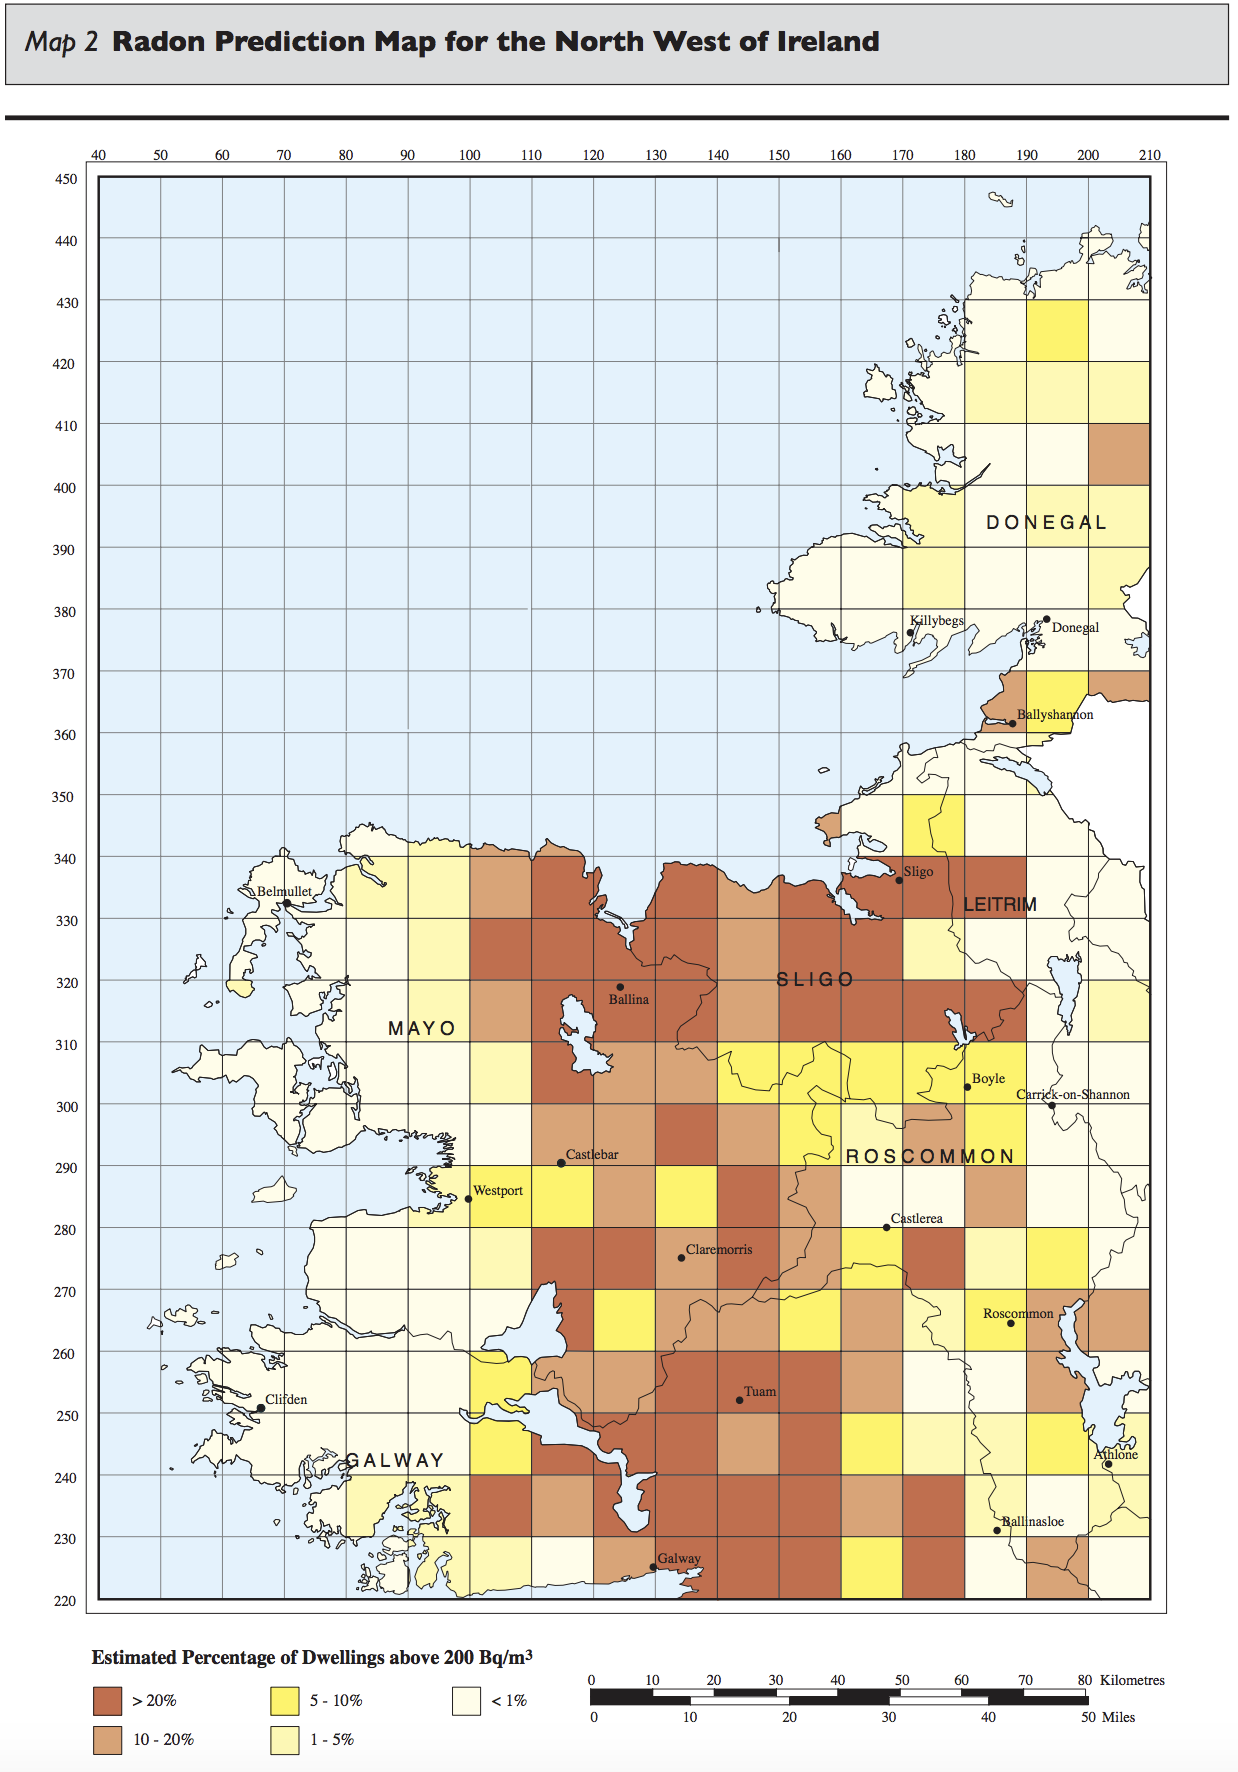 Diagram HC4 - Radon prediction map for the North West of Ireland - Extract from TGD C